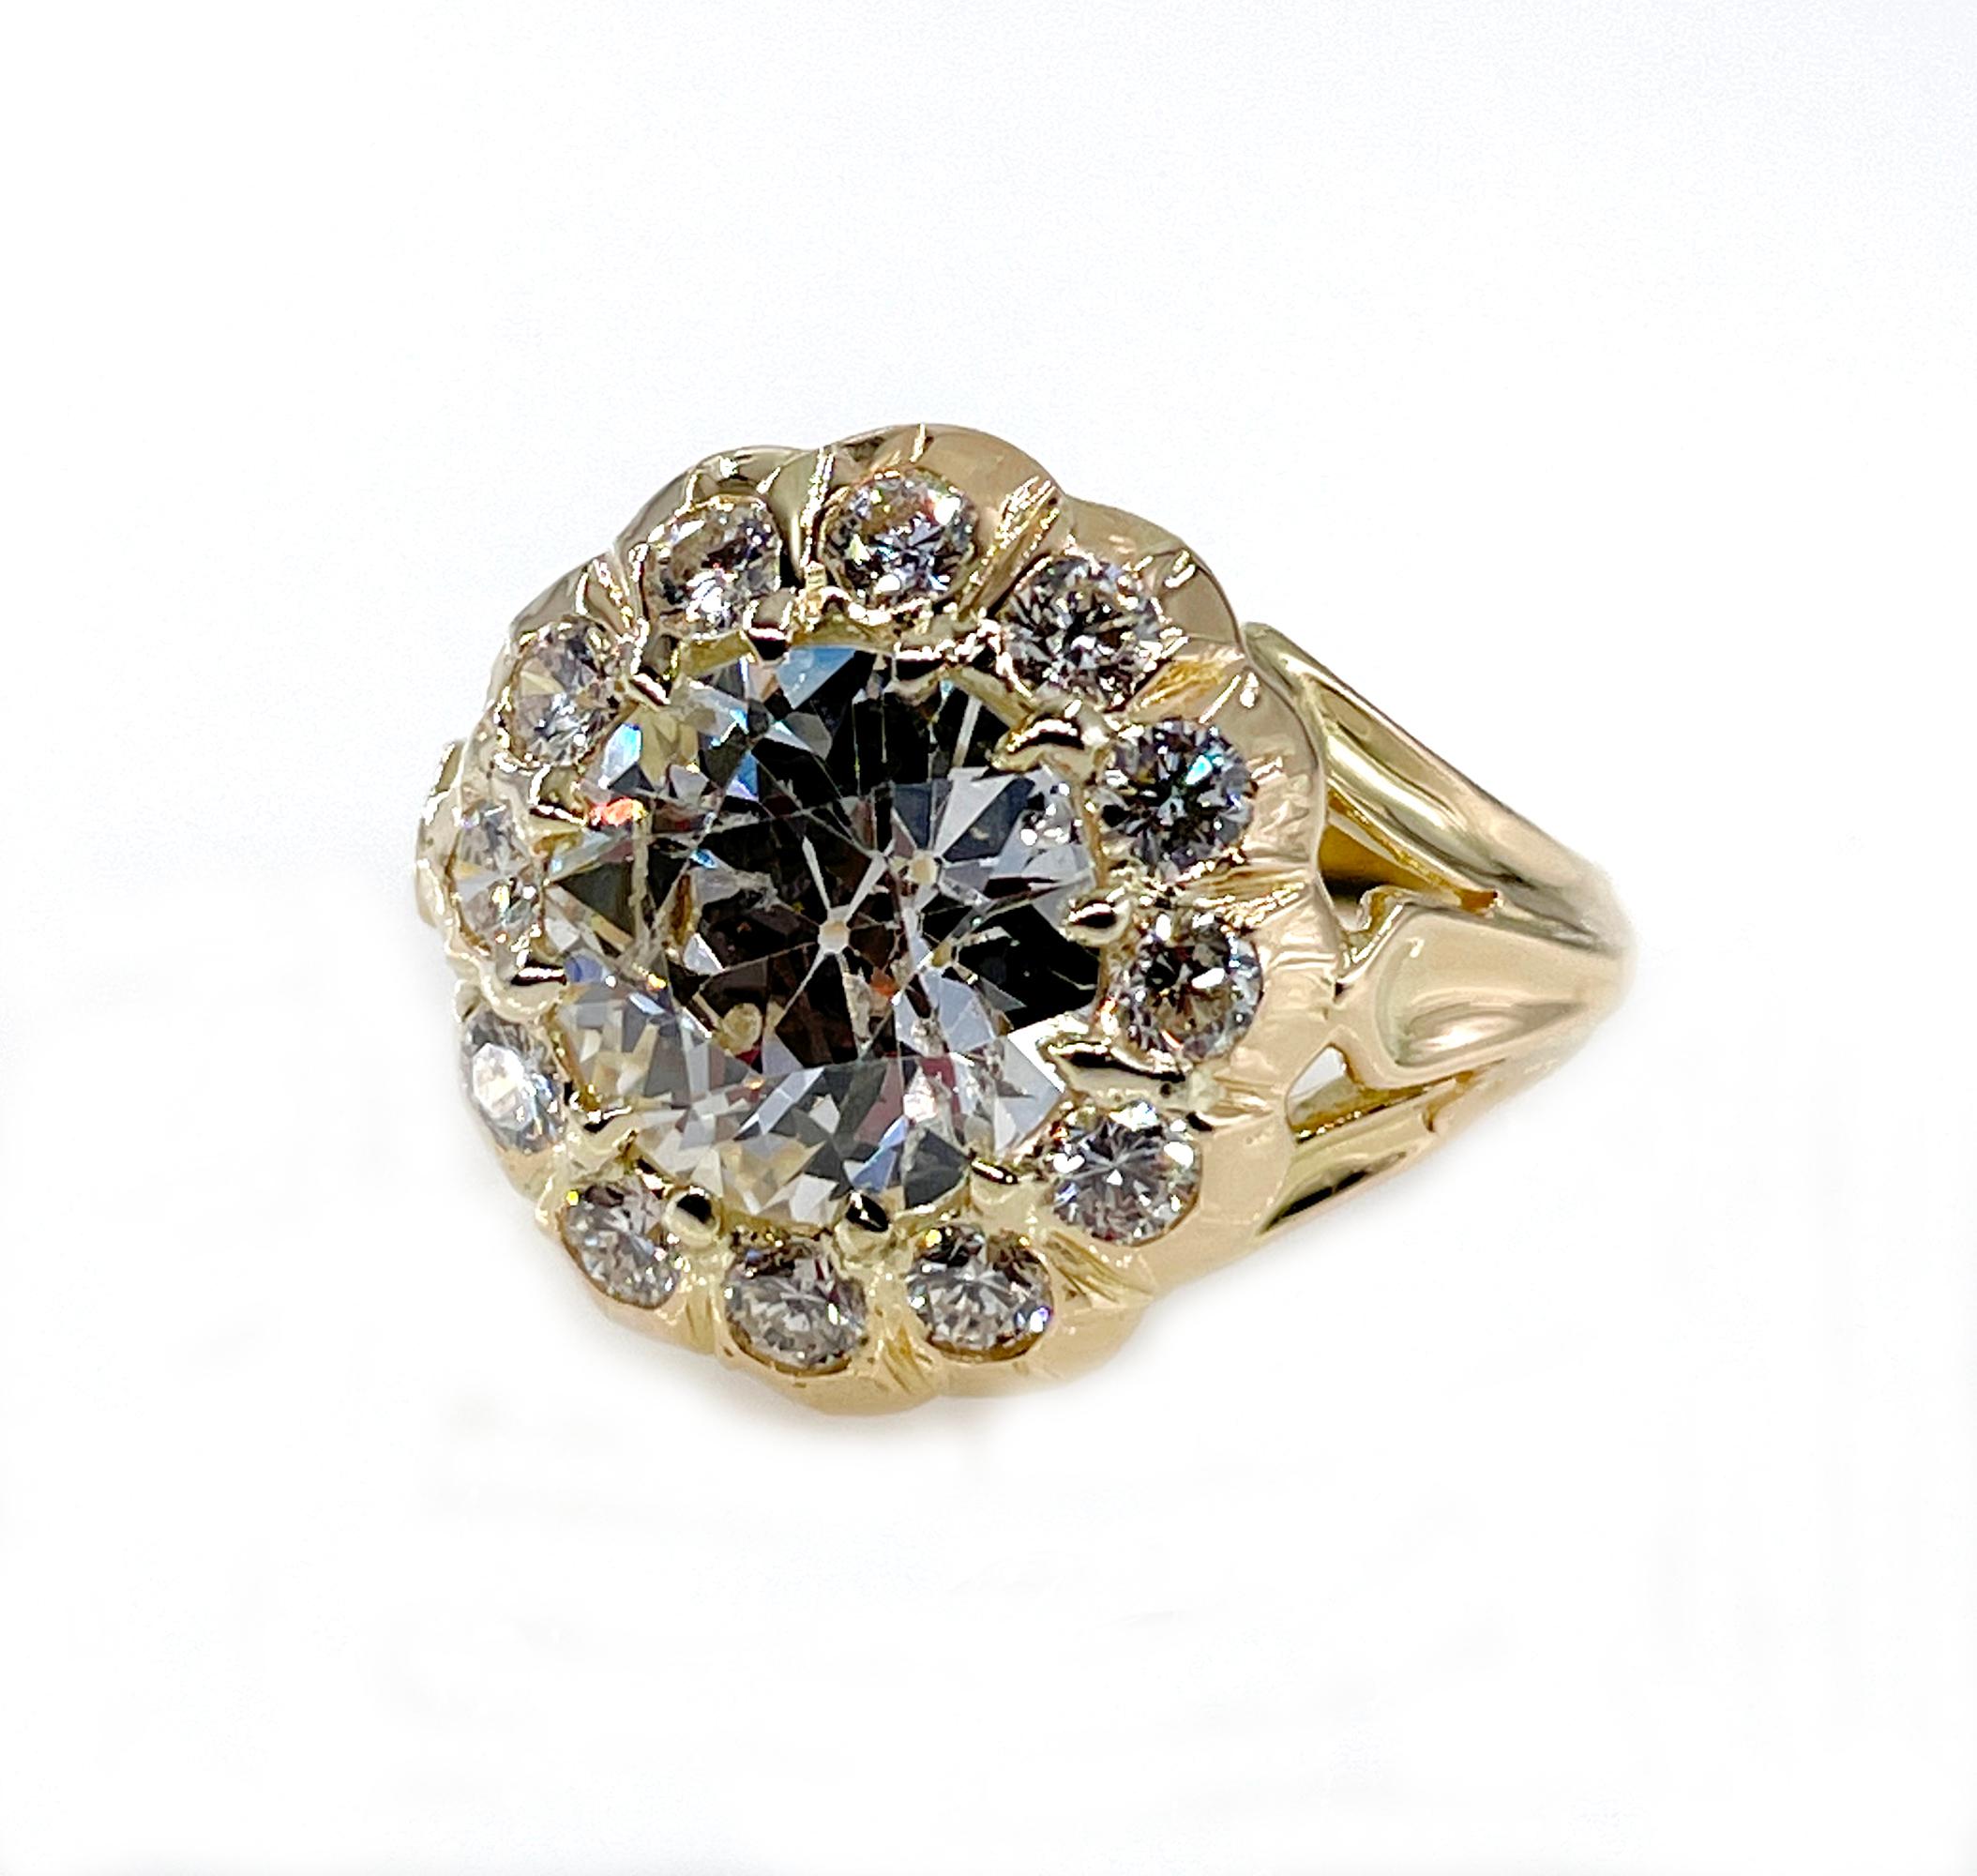 This breathtakingly beautiful CIRCA 1890s Authentic VICTORIAN Cluster Flower shaped 18K yellow Gold Ring (tested) .
The total weight of the diamonds is estimated 3.27ct.

The Center Diamond is an OLD European Cut GIA certified 2.35ct in H color, I1